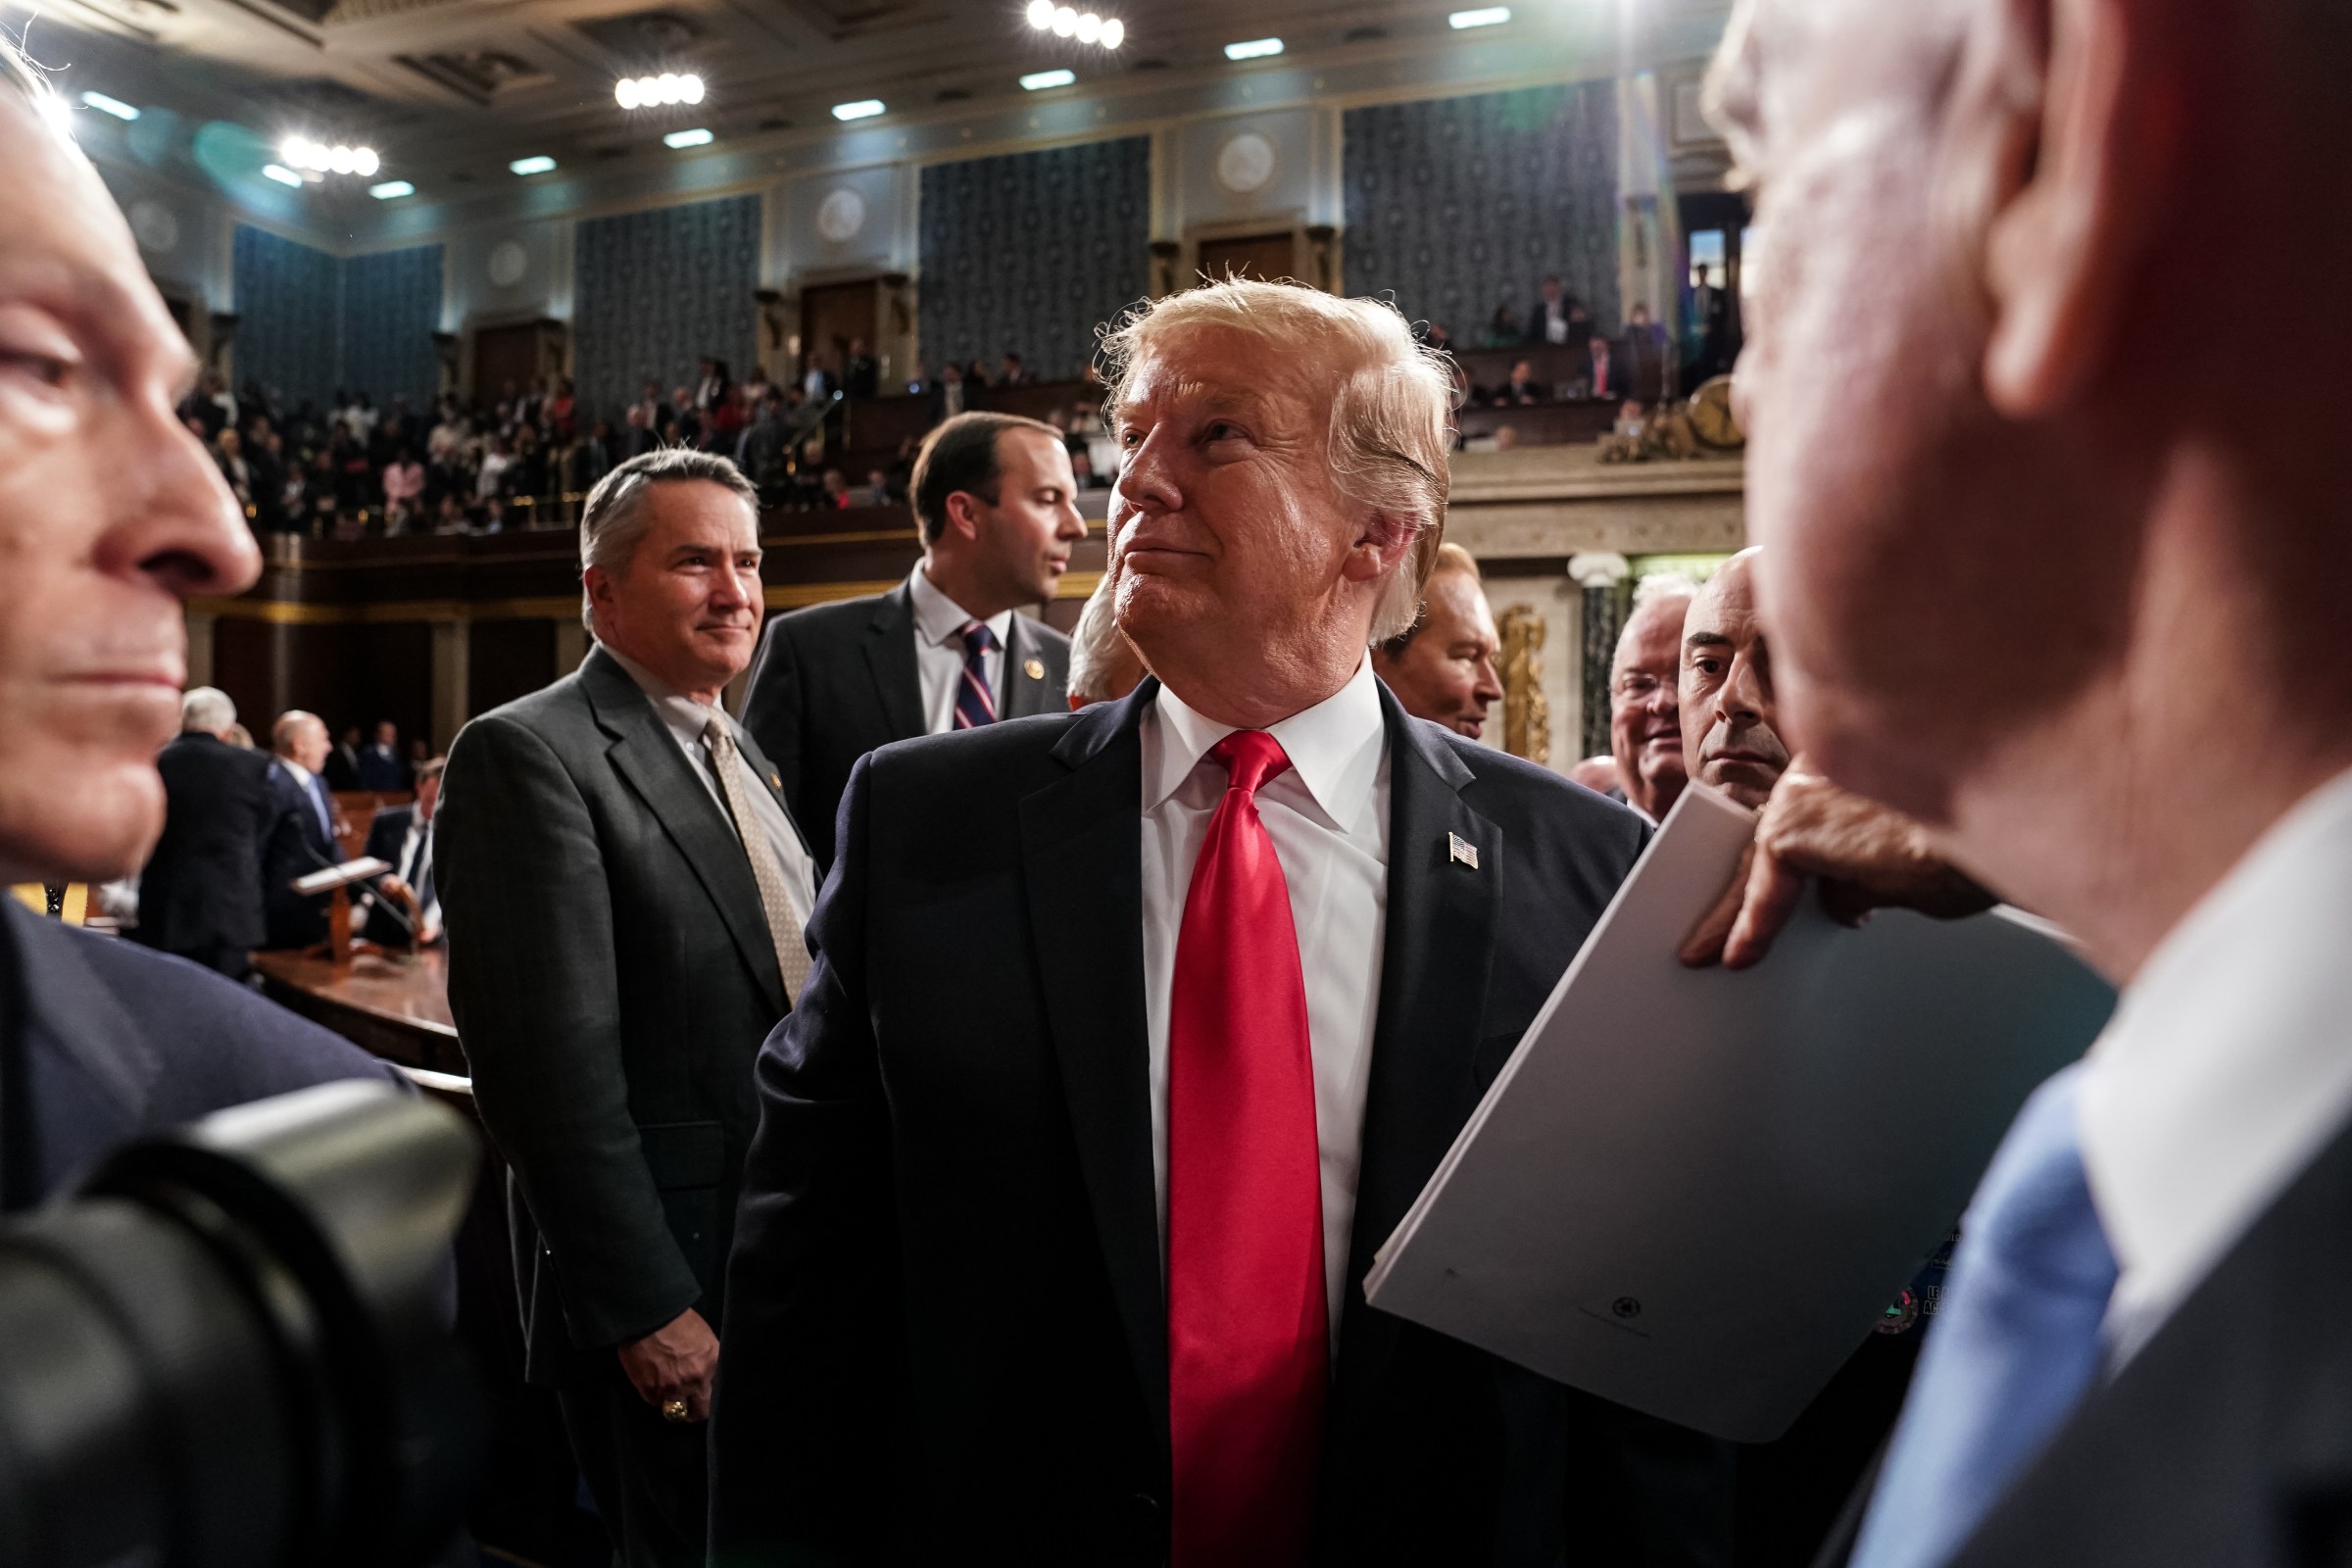 President Donald Trump departs the chamber of the House of Representatives after delivering the State of the Union address in February 2019.